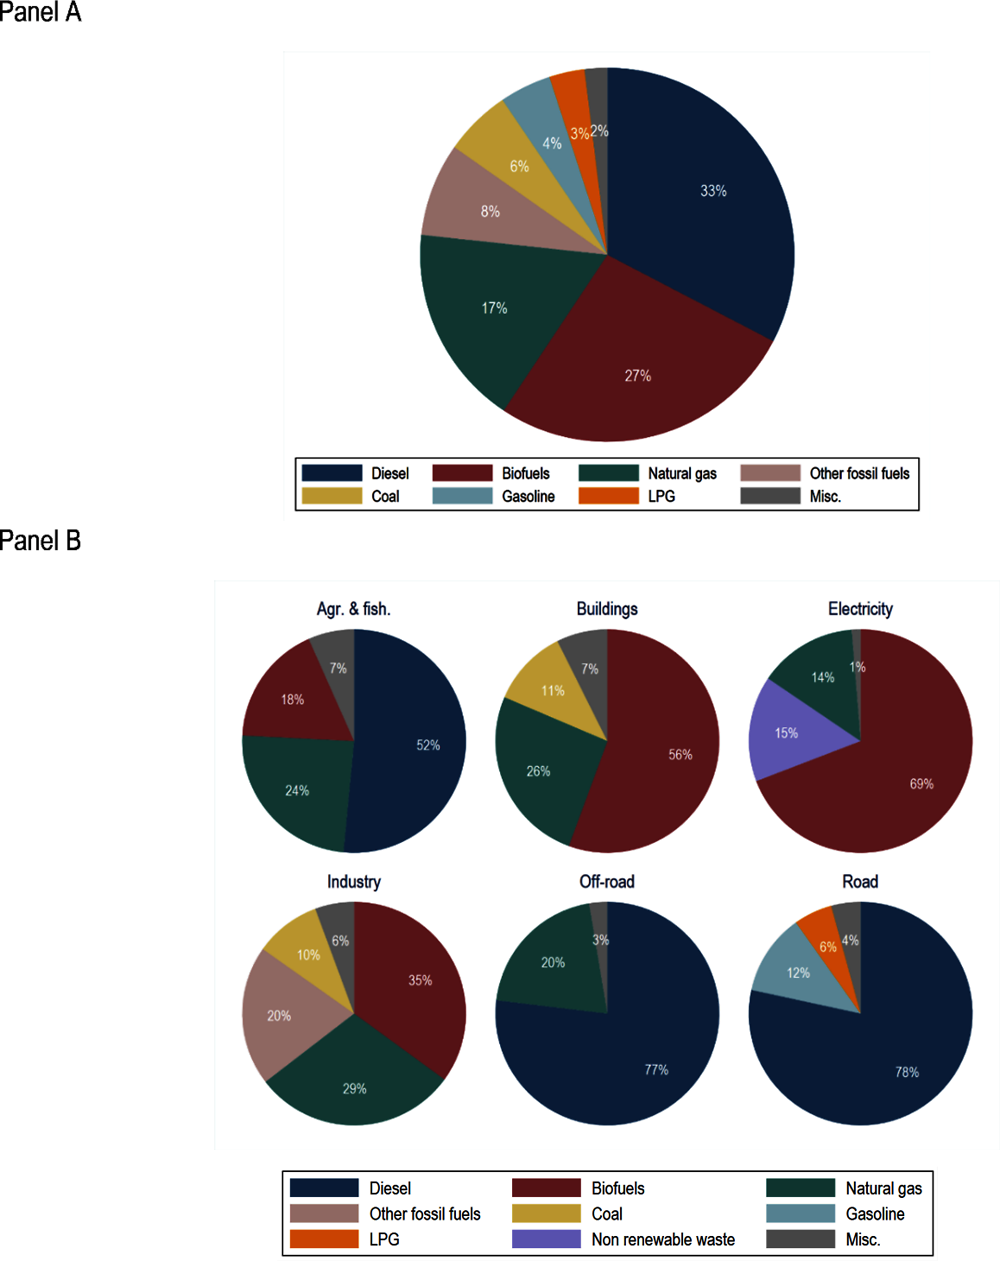 Figure 4.2. Fuel use in Lithuania principally comprises diesel, biofuels and natural gas use